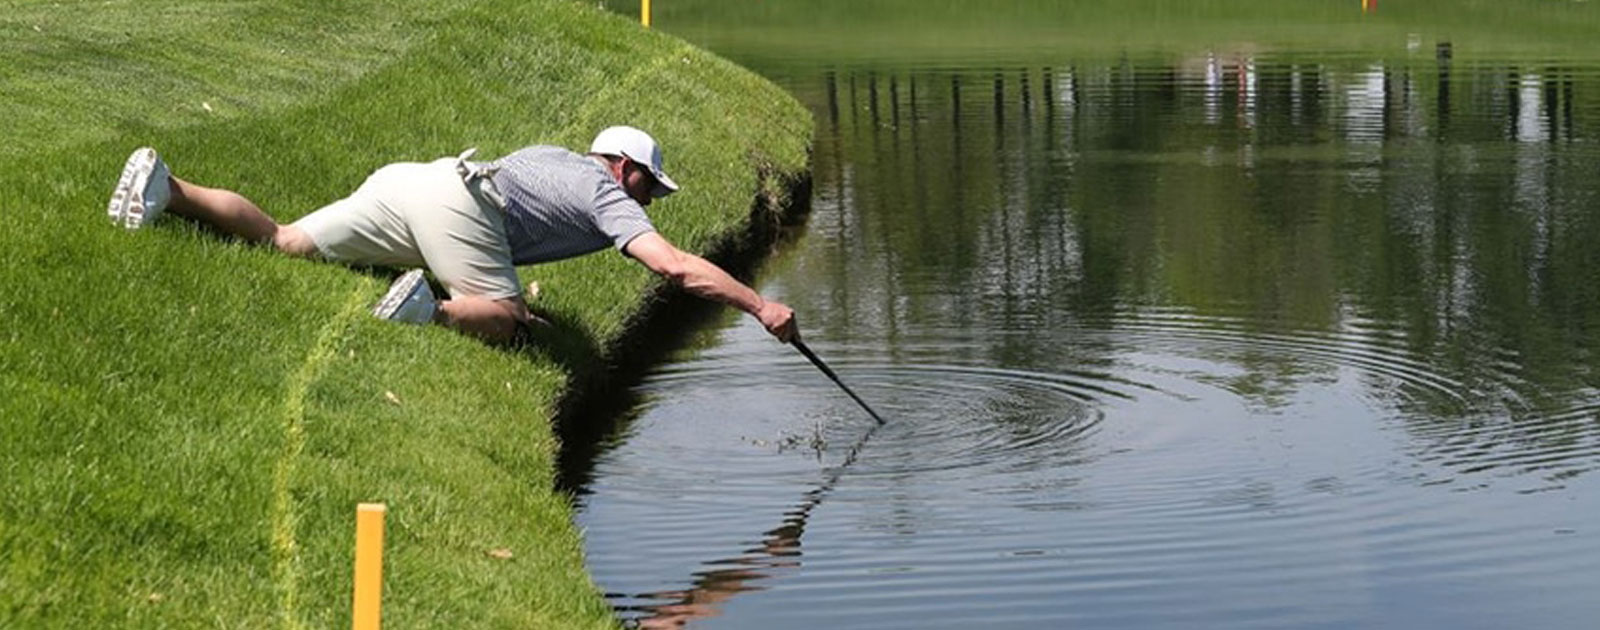 man looking for golf balls in water